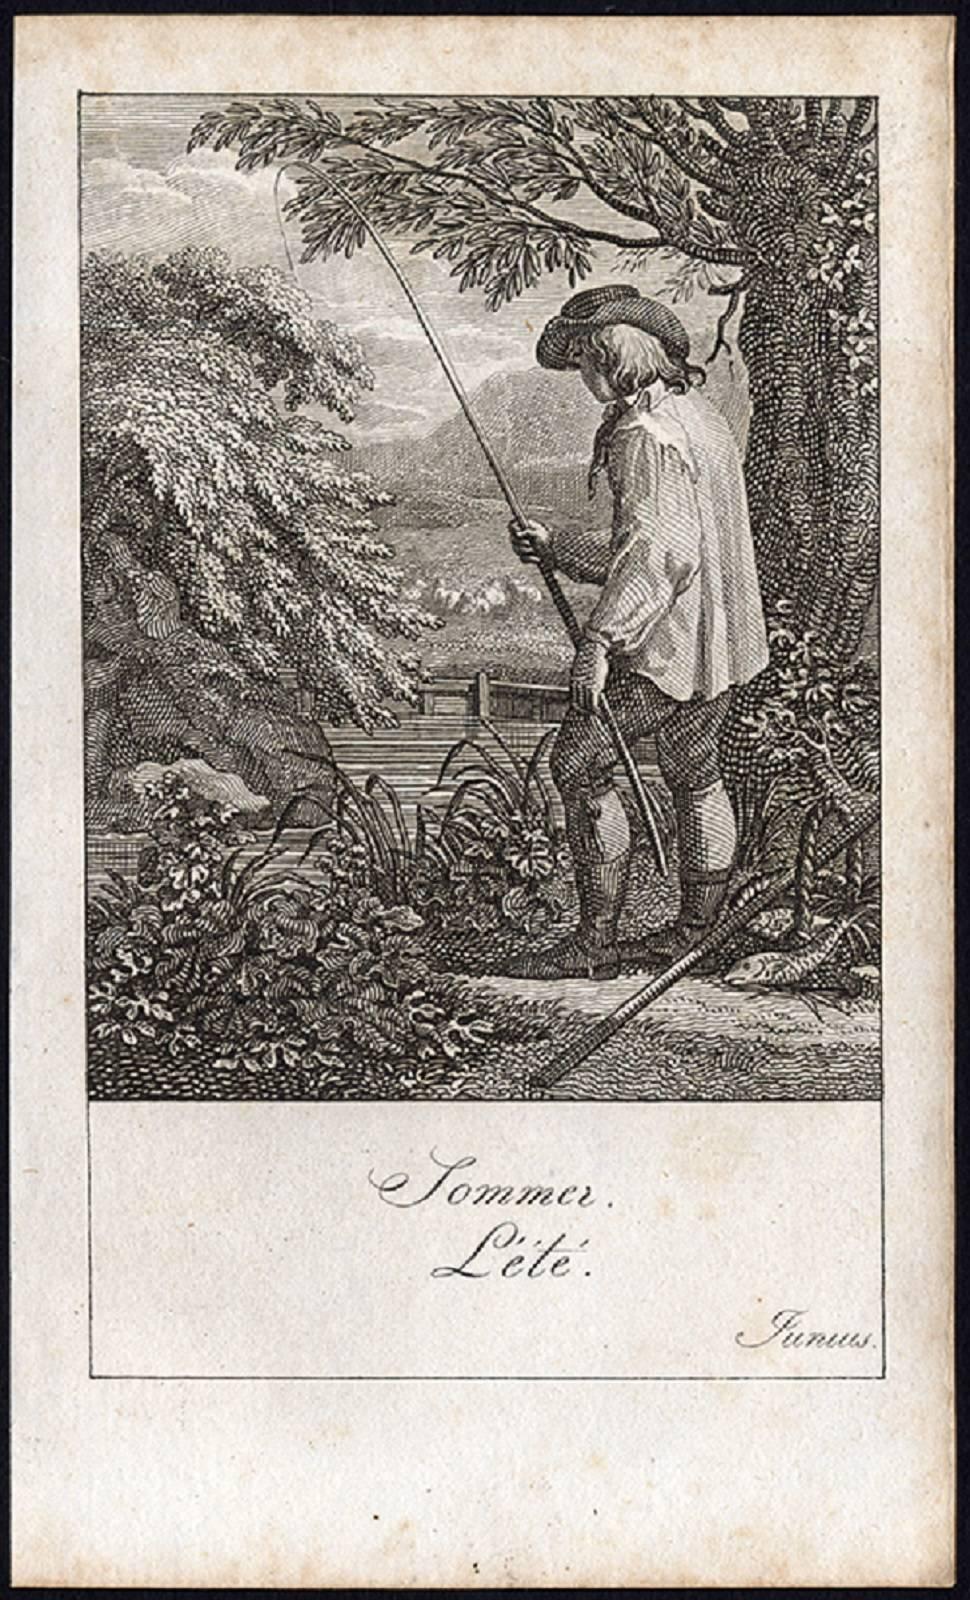 It shows: a set of four prints, together the four seasons. Spring (Marz/March) shows a Putto holding a torch, seated on a basket of flowers in front of which two doves 'kiss'. Summer (Junius/June) shows a fisherman at water's edge. Autumn